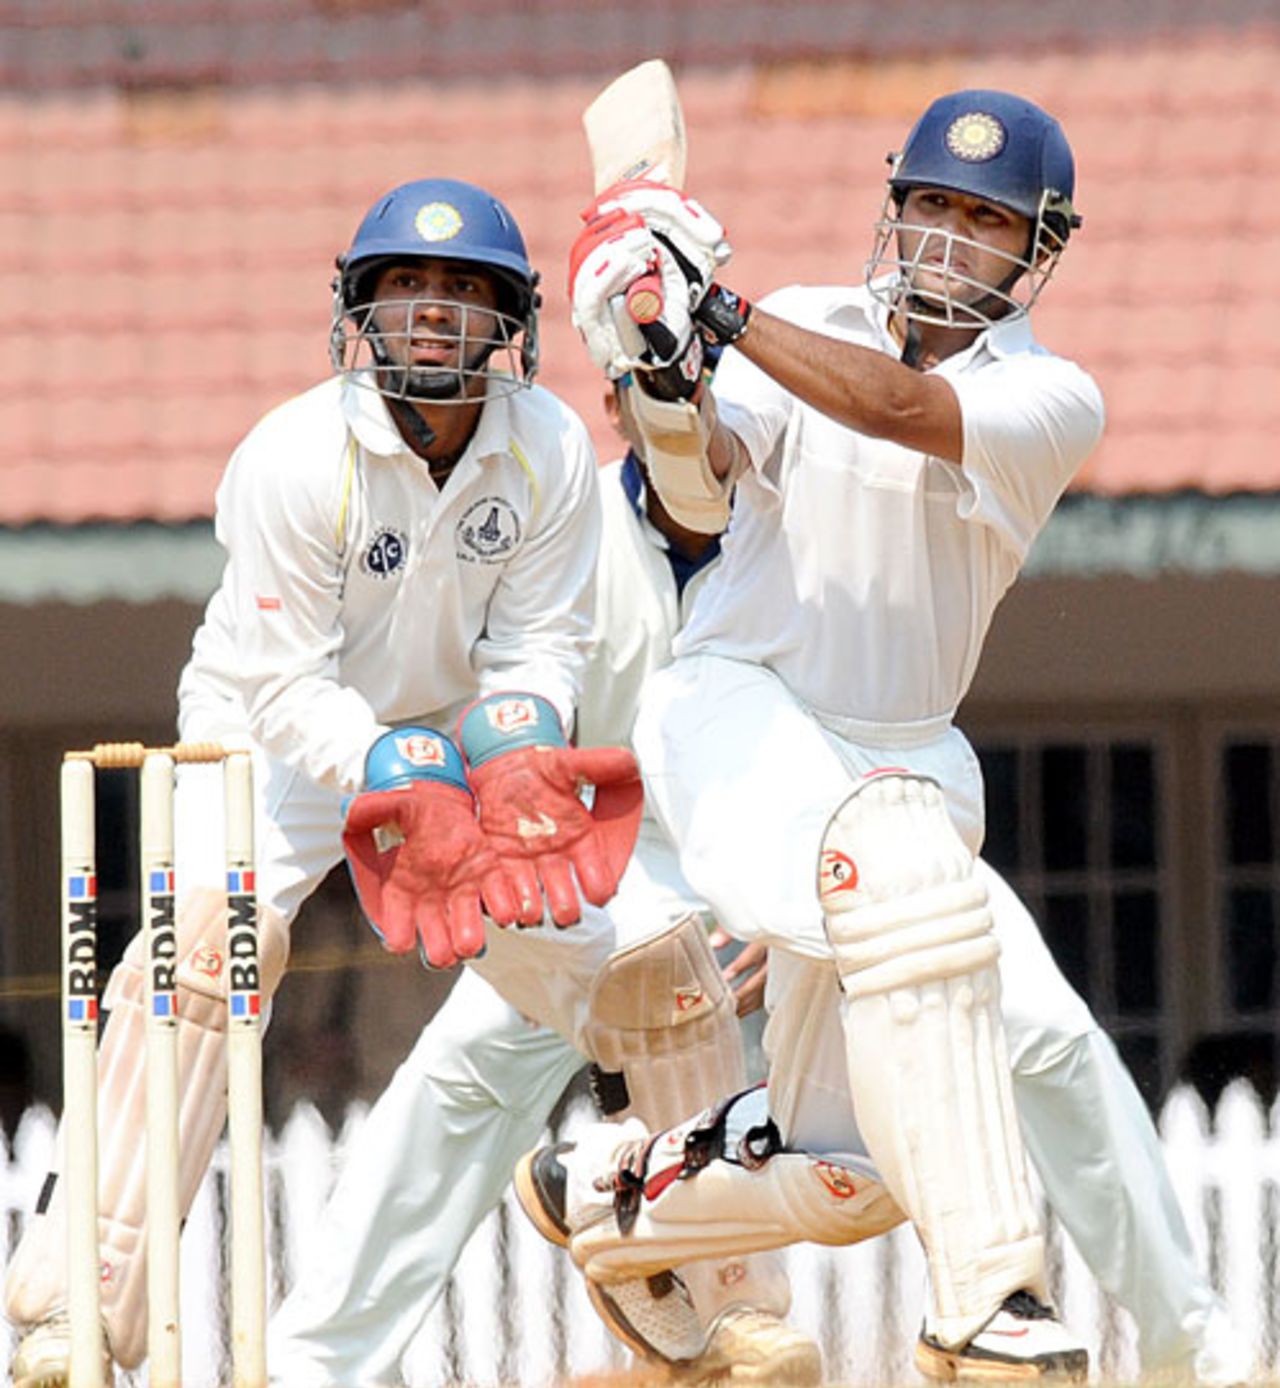 Parthiv Patel lofts one over midwicket, South Zone v West Zone, Duleep Trophy final, Chennai, 3rd day, February 7, 2009